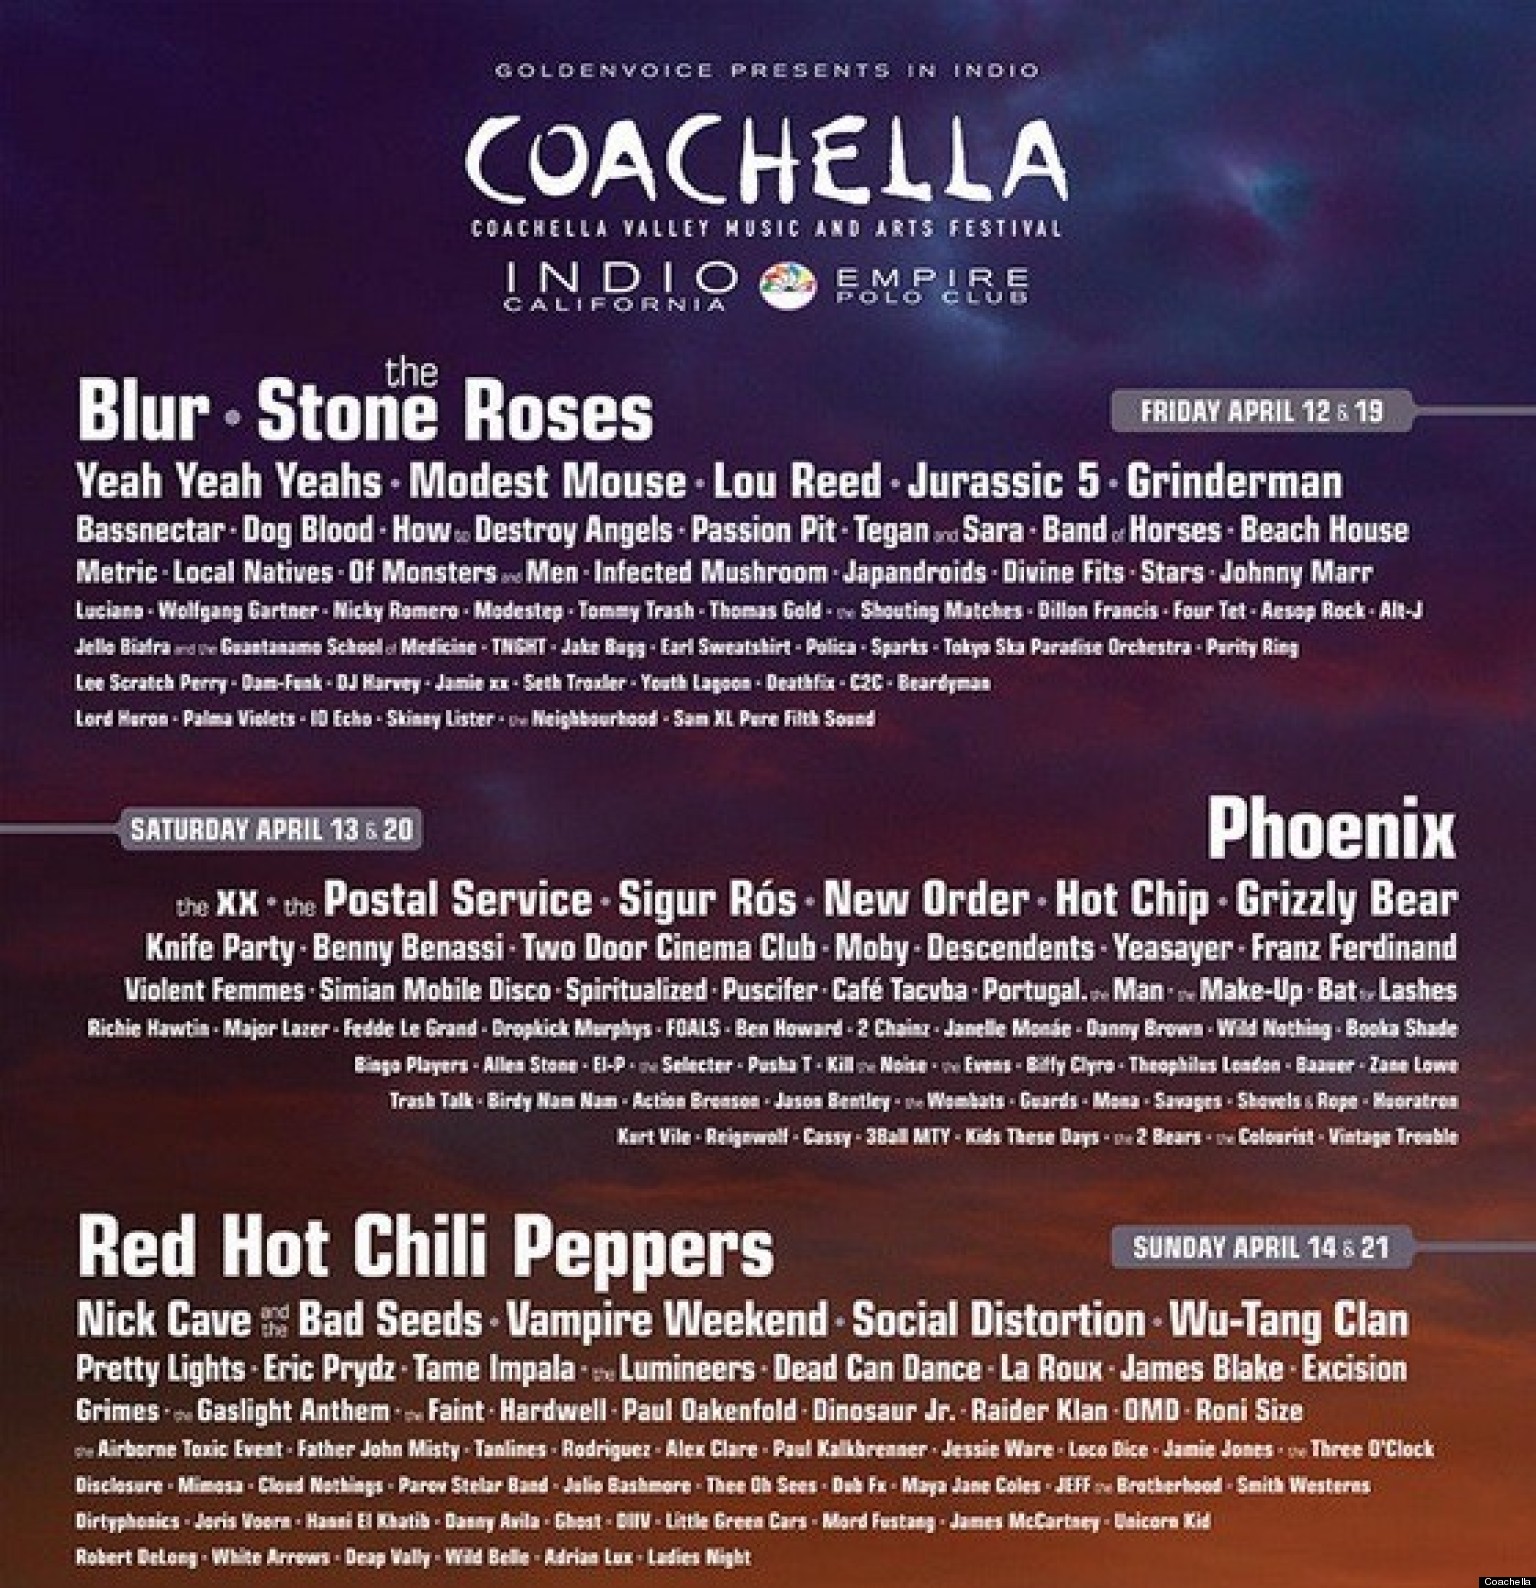 Coachella 2013 Lineup Announced Blur, The Stone Roses, Phoenix And Red